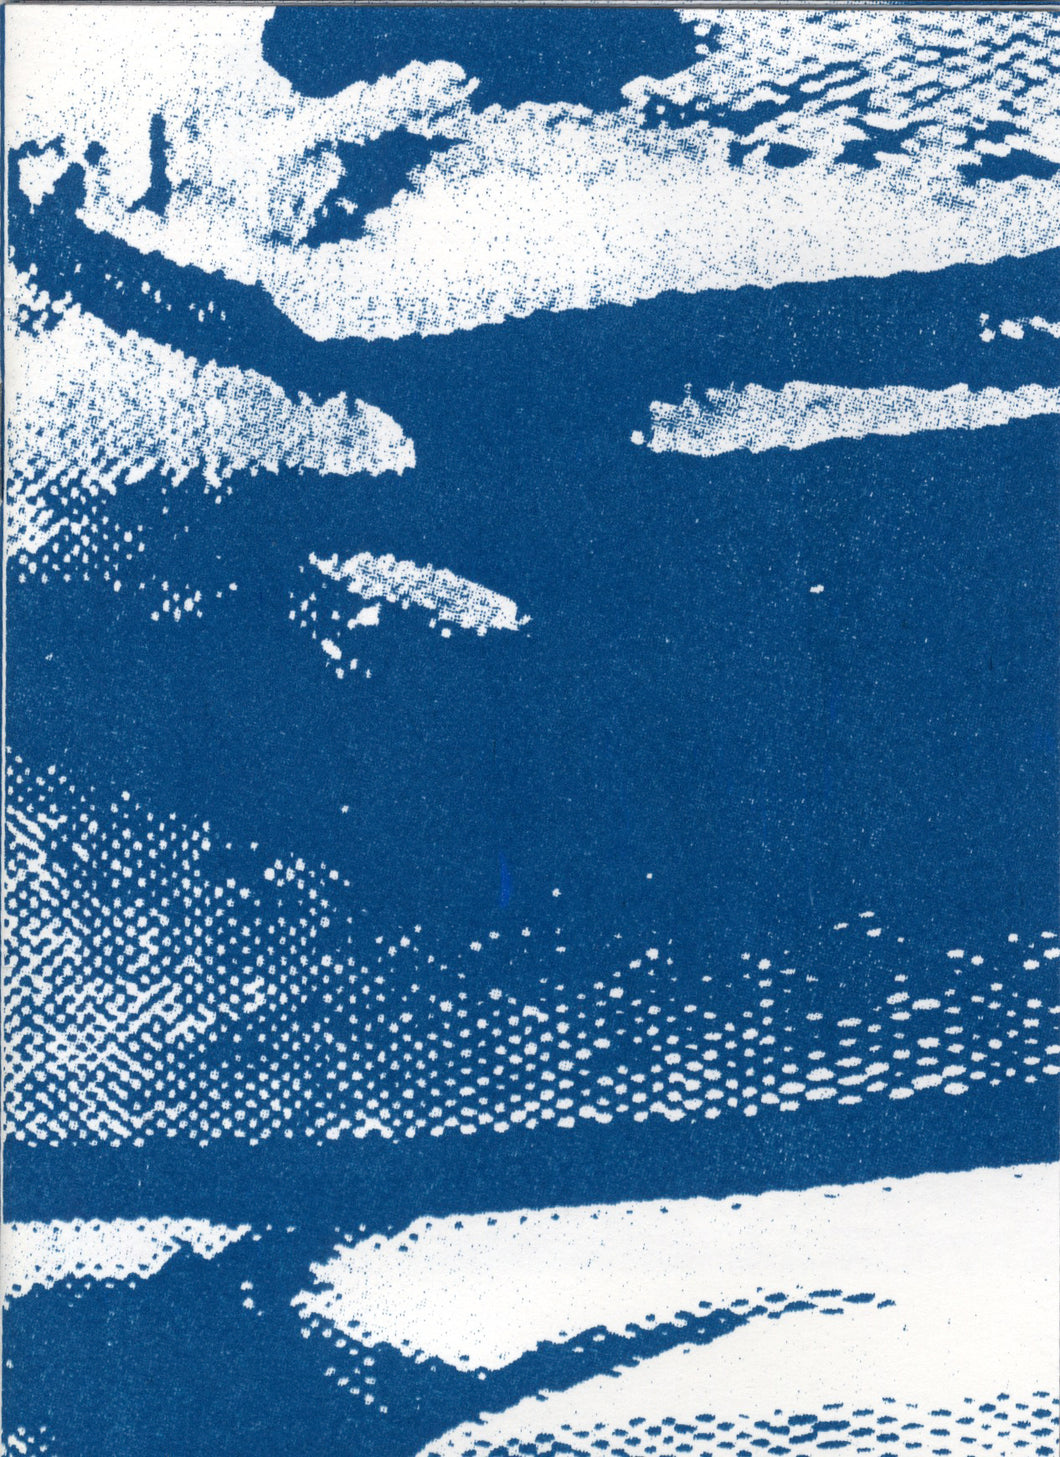 Mini Zine | Roth Spiral Grinds on X-Ray by Sergej Vutuc